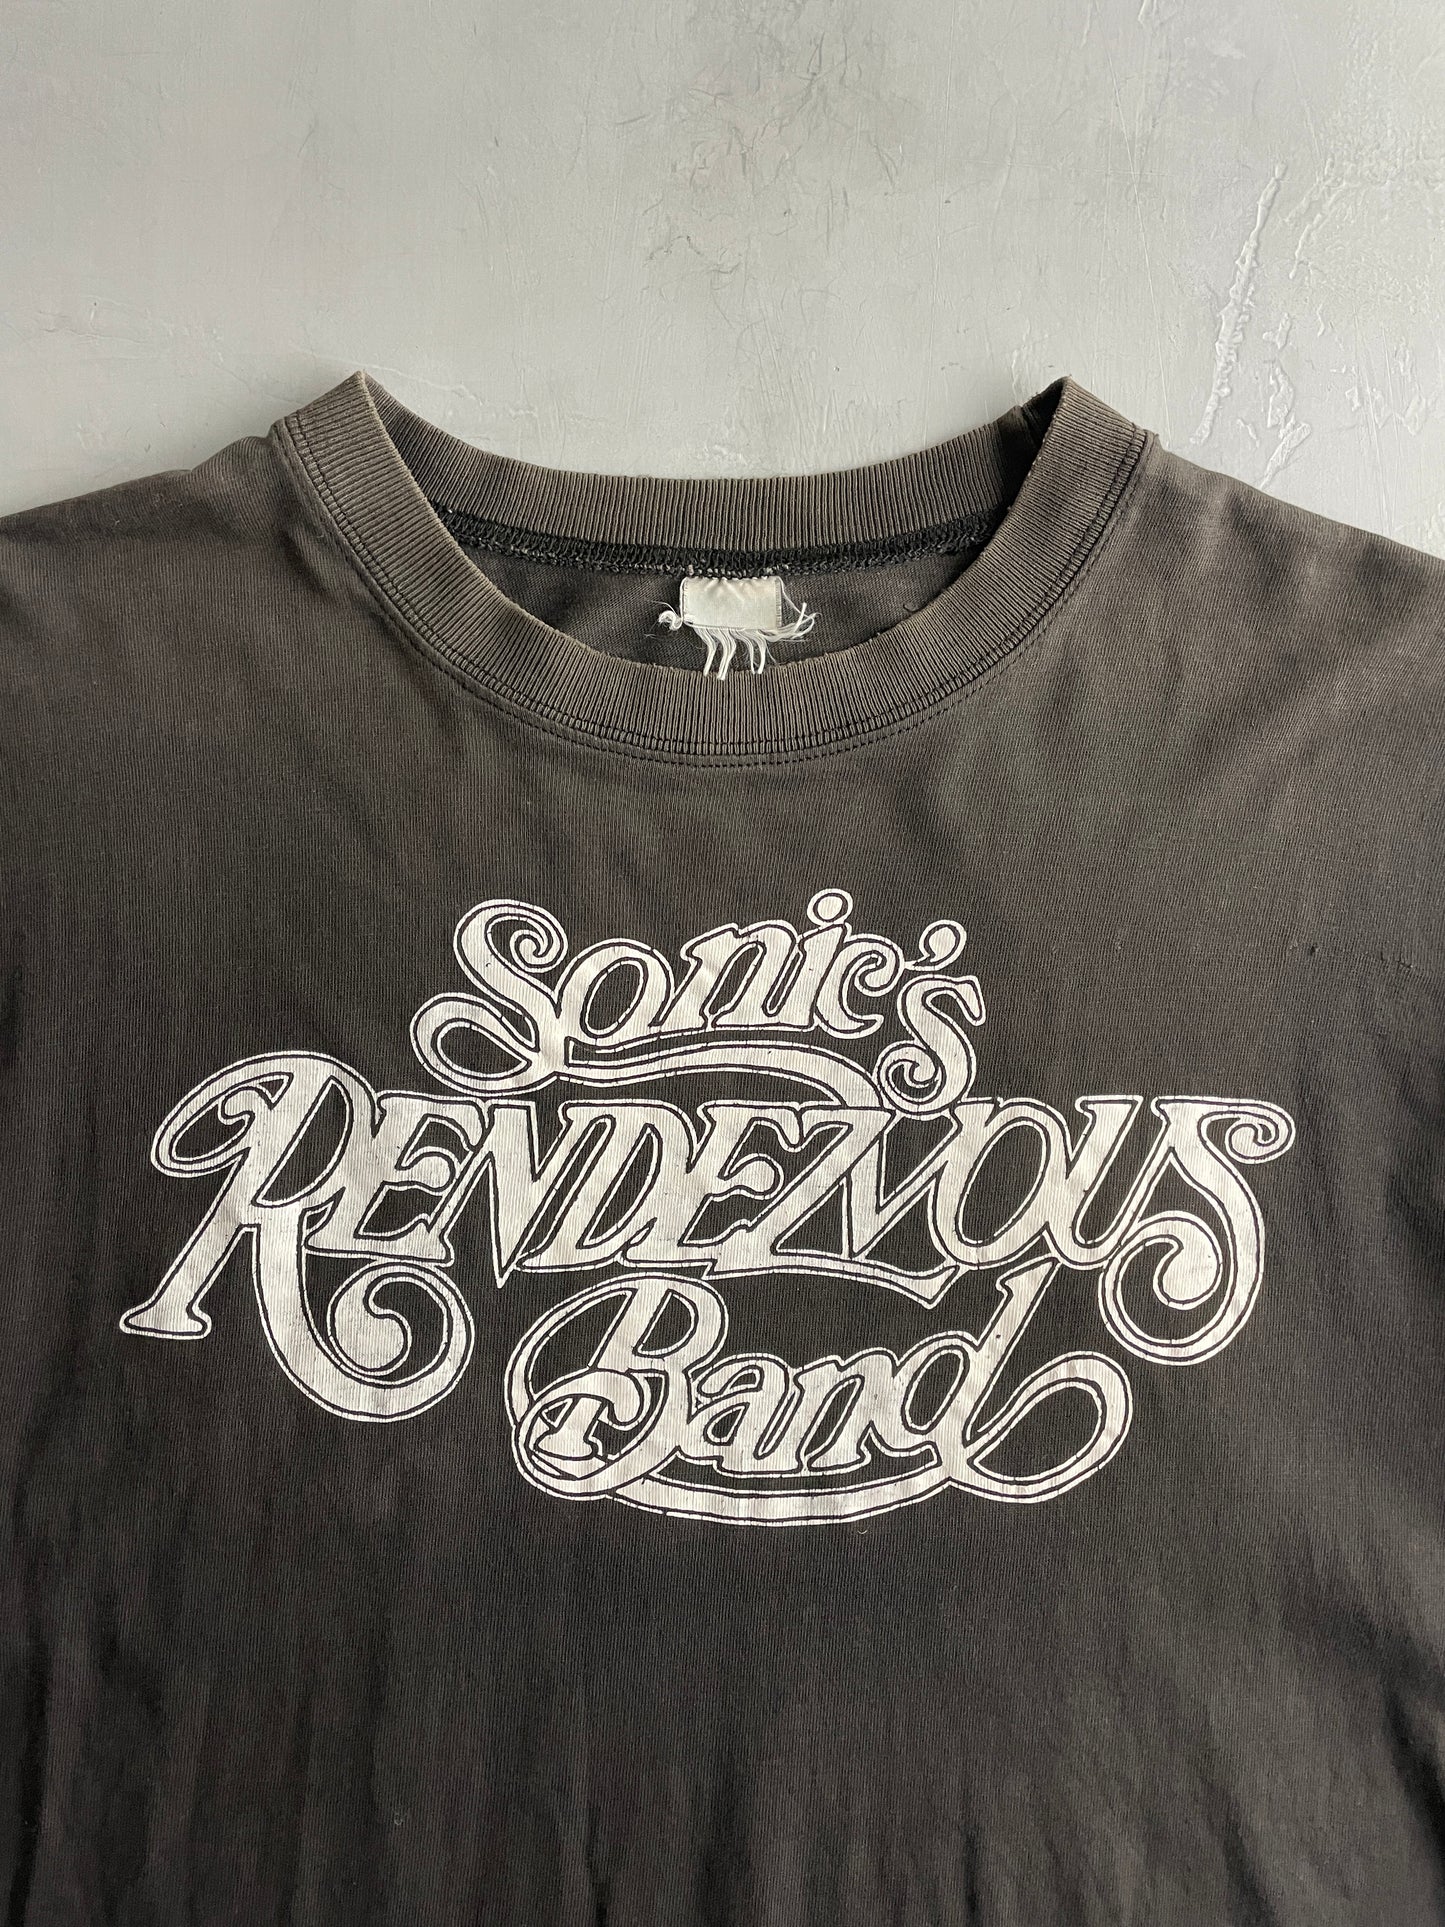 90's Sonic's Rendevous Band Tee [L]